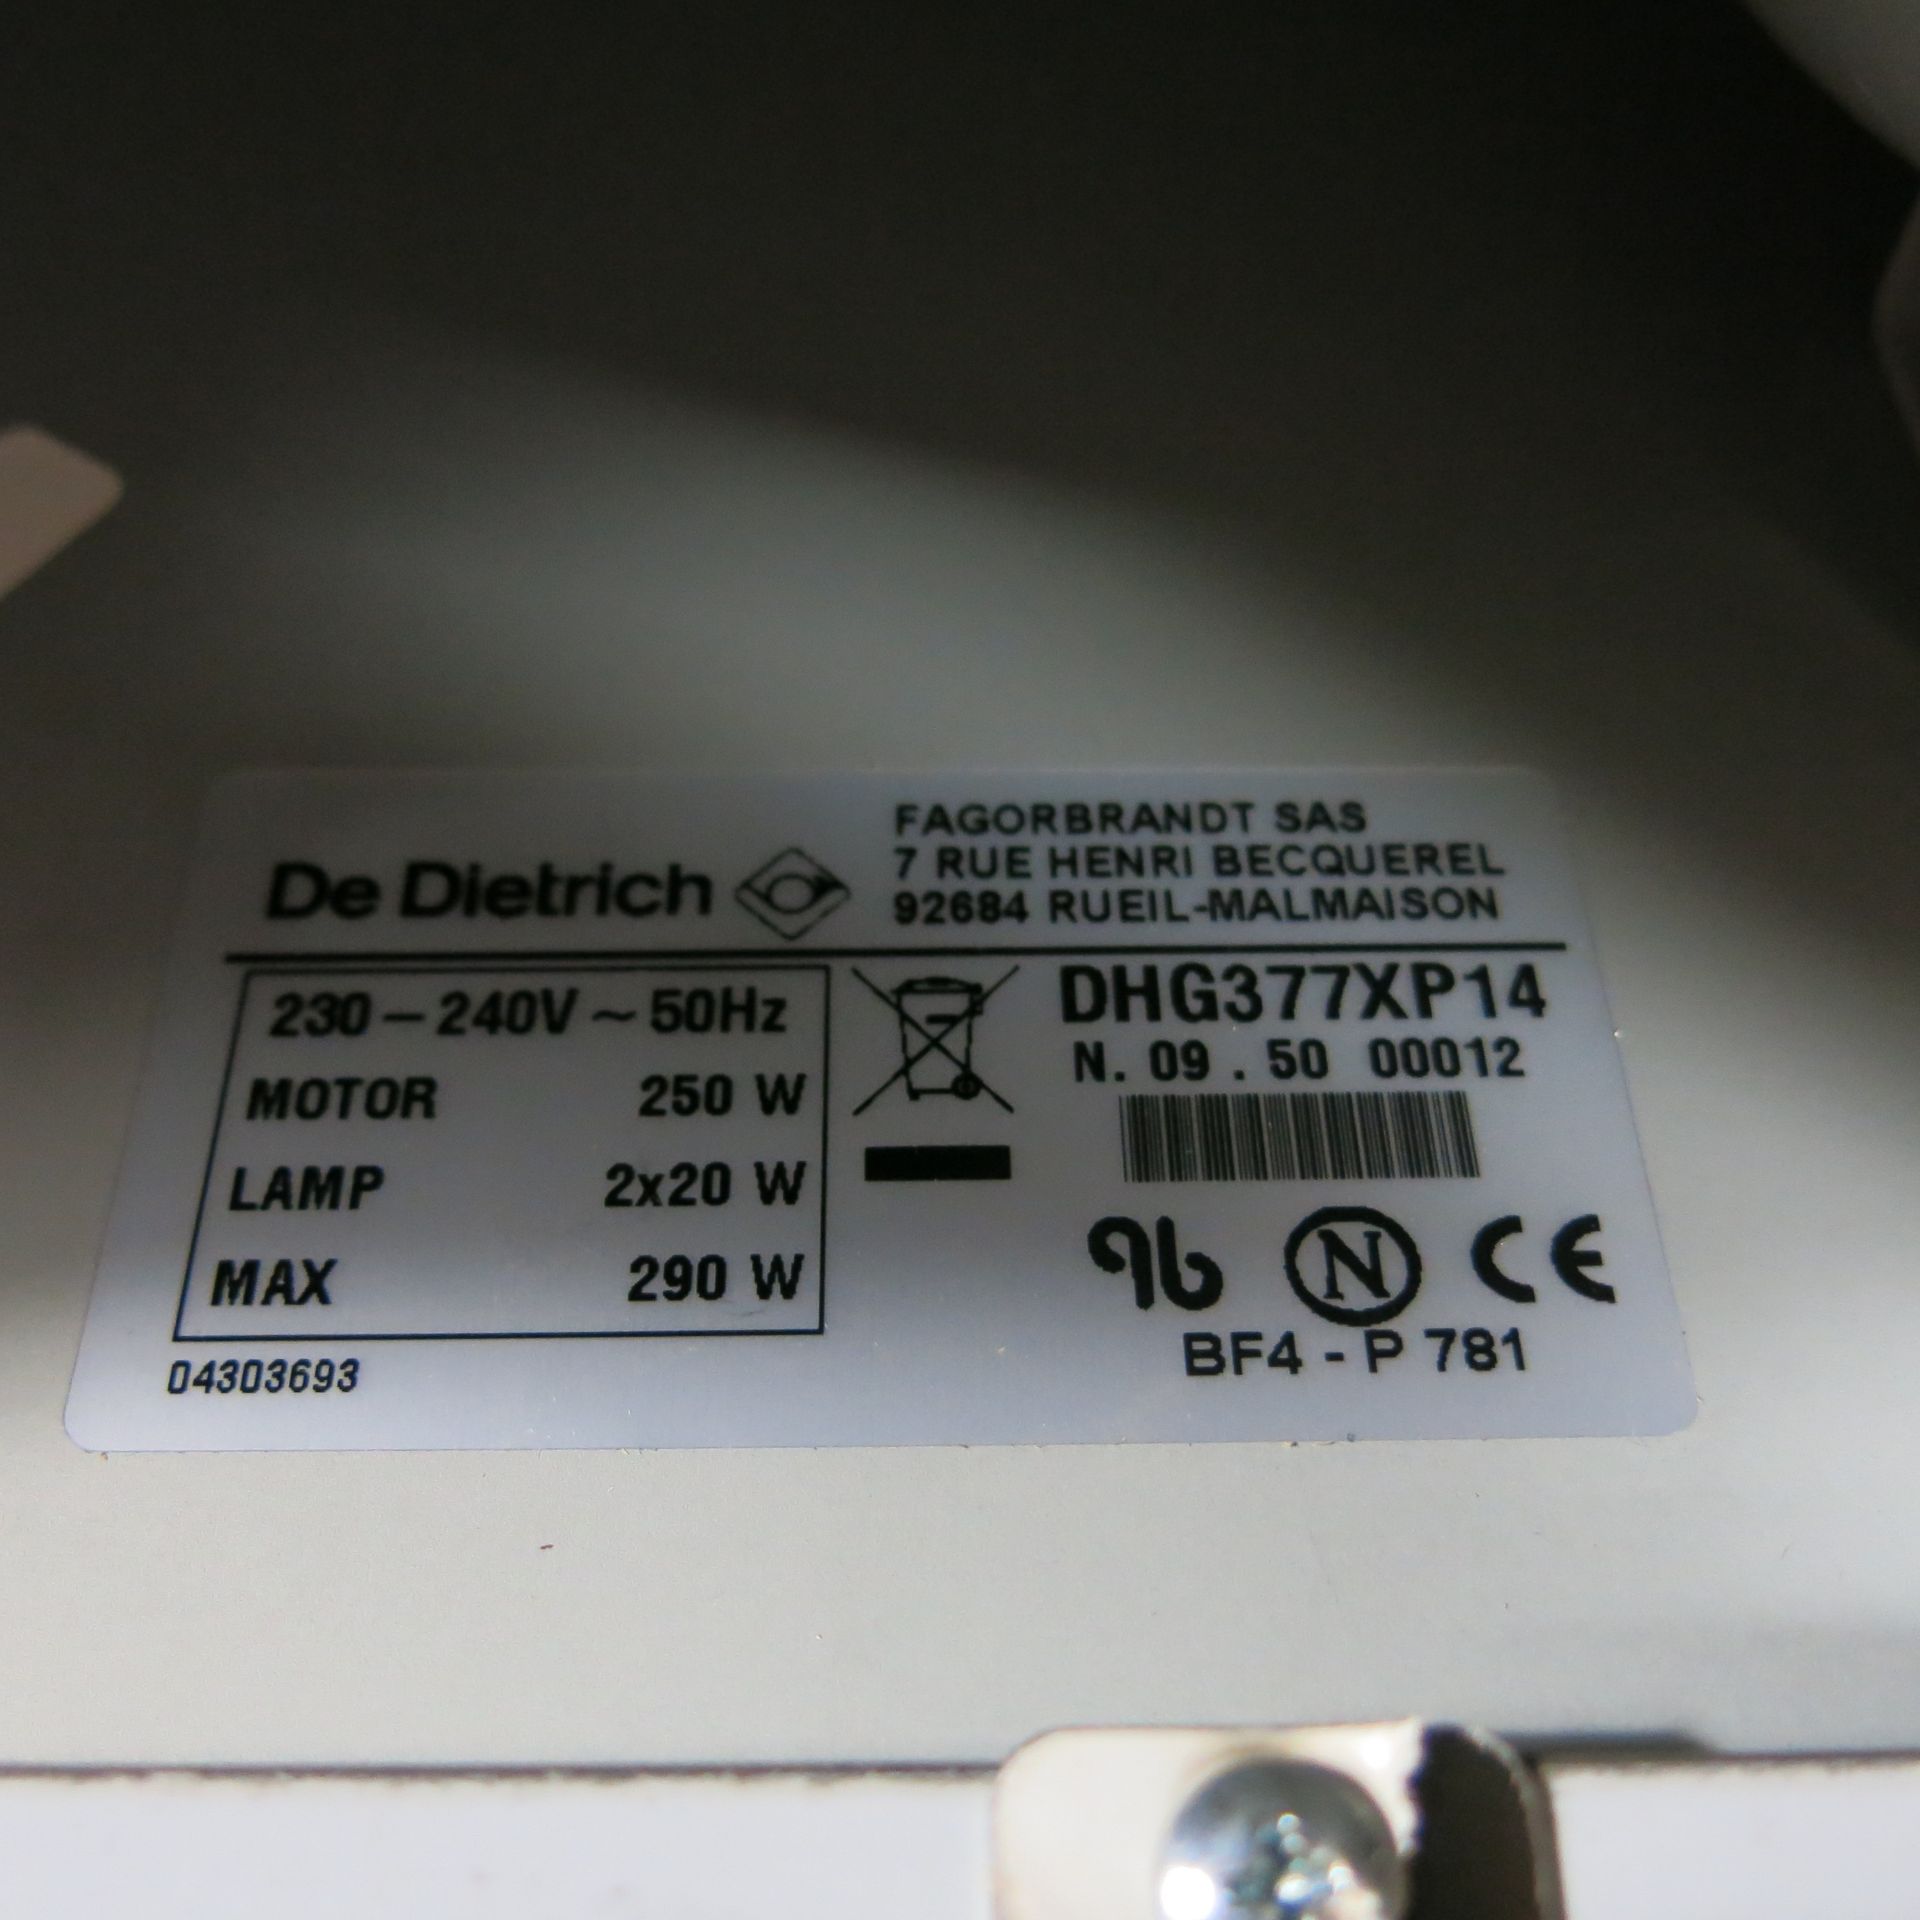 De Dietrich 70cm Integrated Extractor Hood, Model DHG377XP14. Missing Light Cover. Ex Display/As - Image 3 of 3